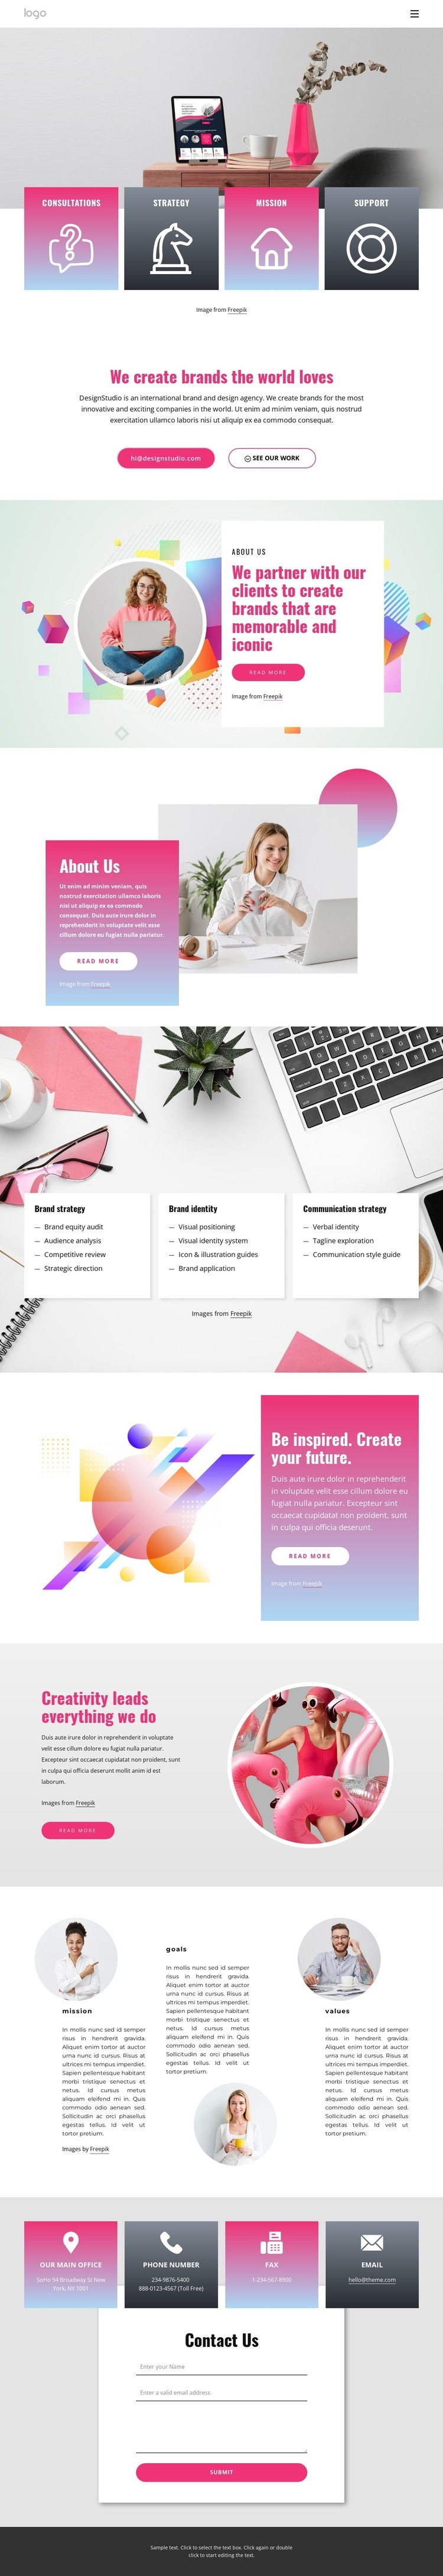 Creativity leads everything we do Homepage Design